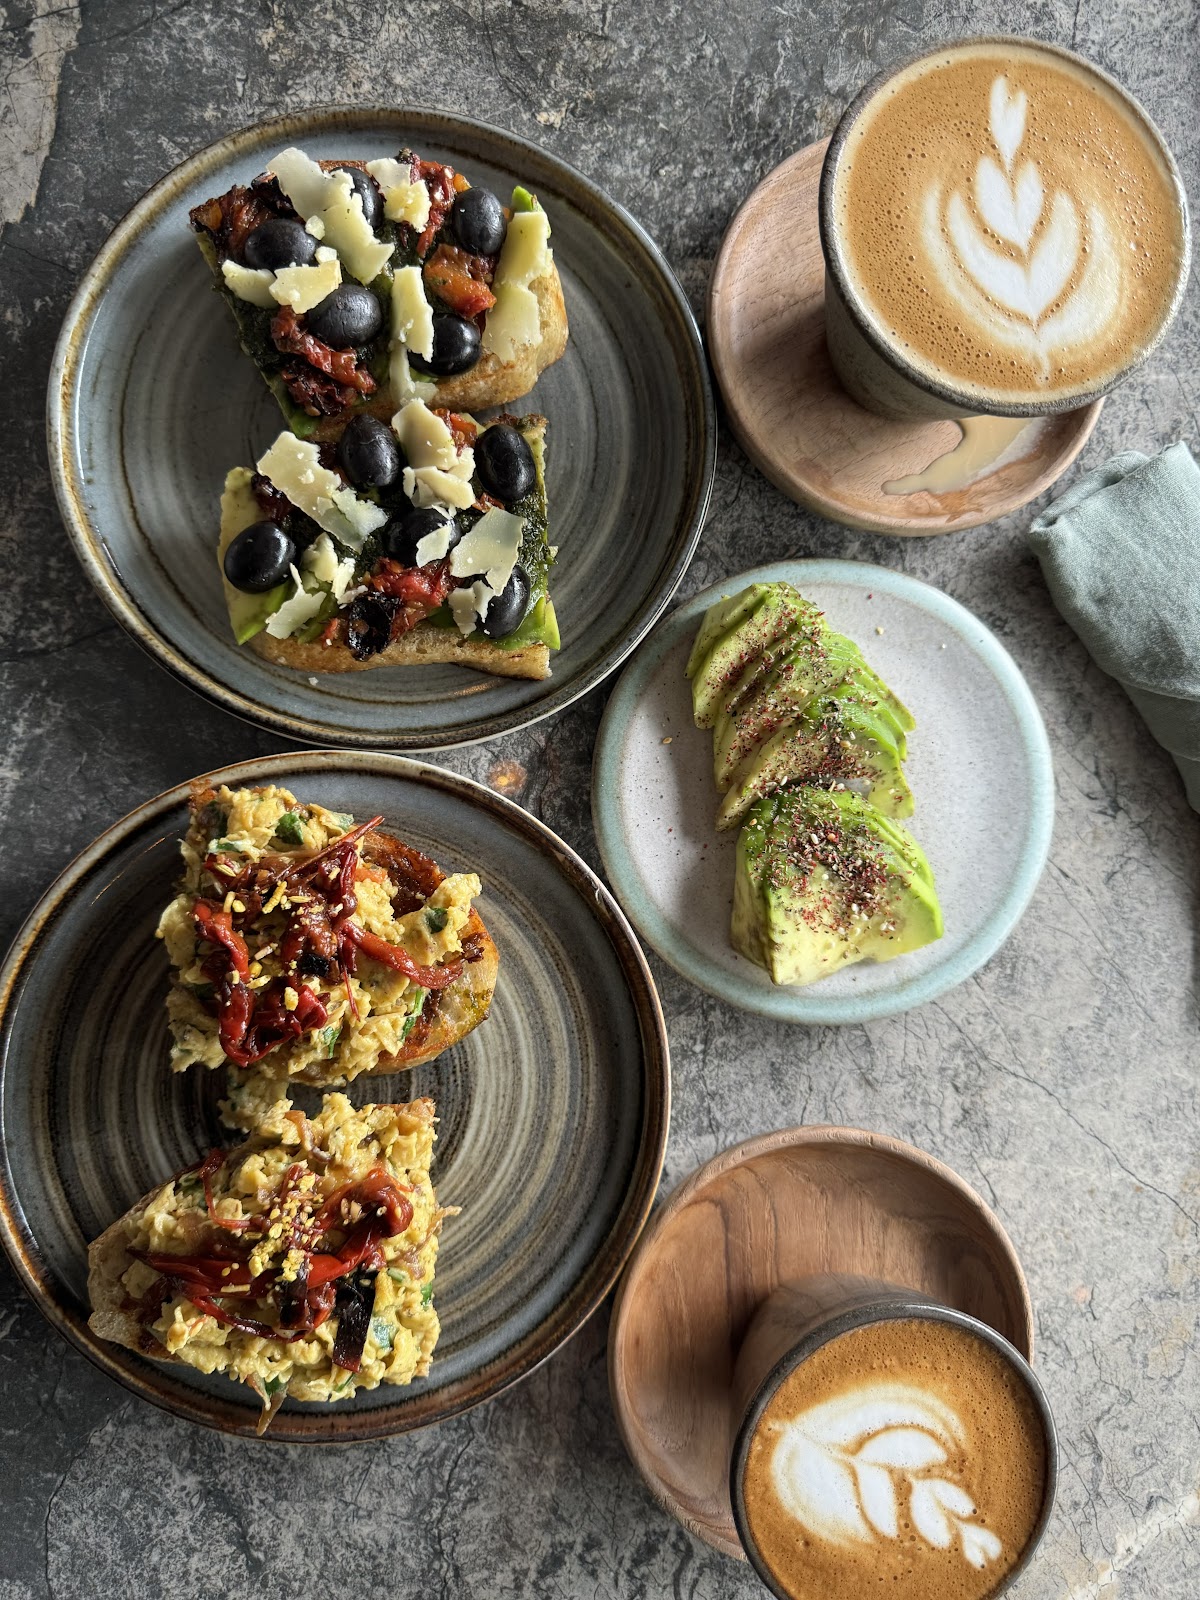 Cafe Tucky | Specialty Coffee & Brunch 11000